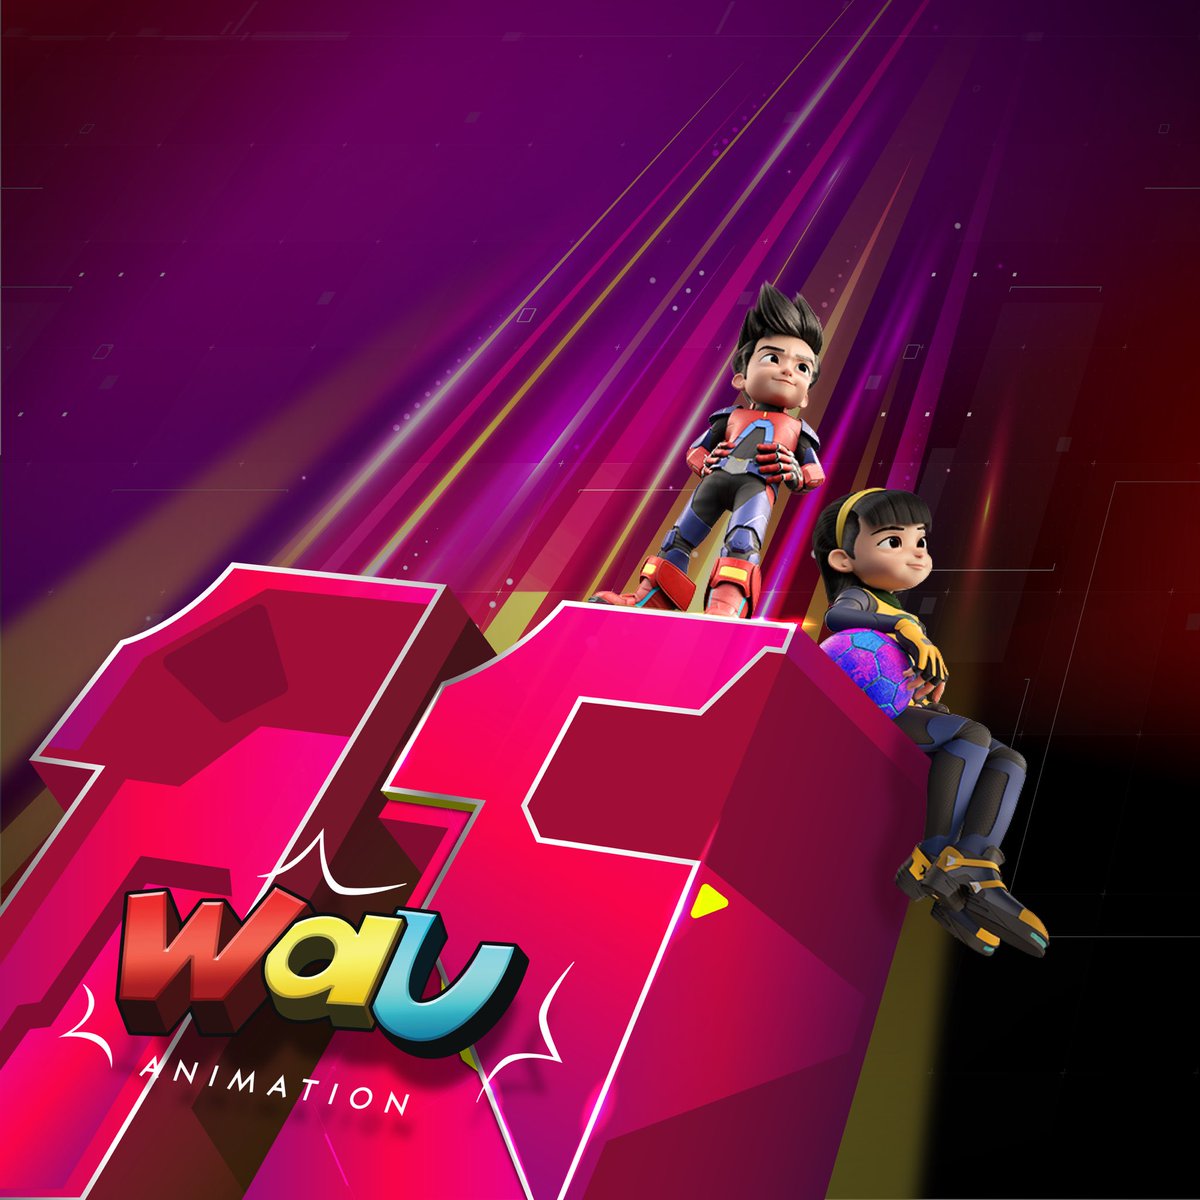 WAU, can't believe it's been 11 incredible years since we started this adventure! Shoutout to the amazing team for bringing the visions to life and to our fans for their endless support.🎉✨ #WAUAnimationAnniversary' #tengahbuatmovie2